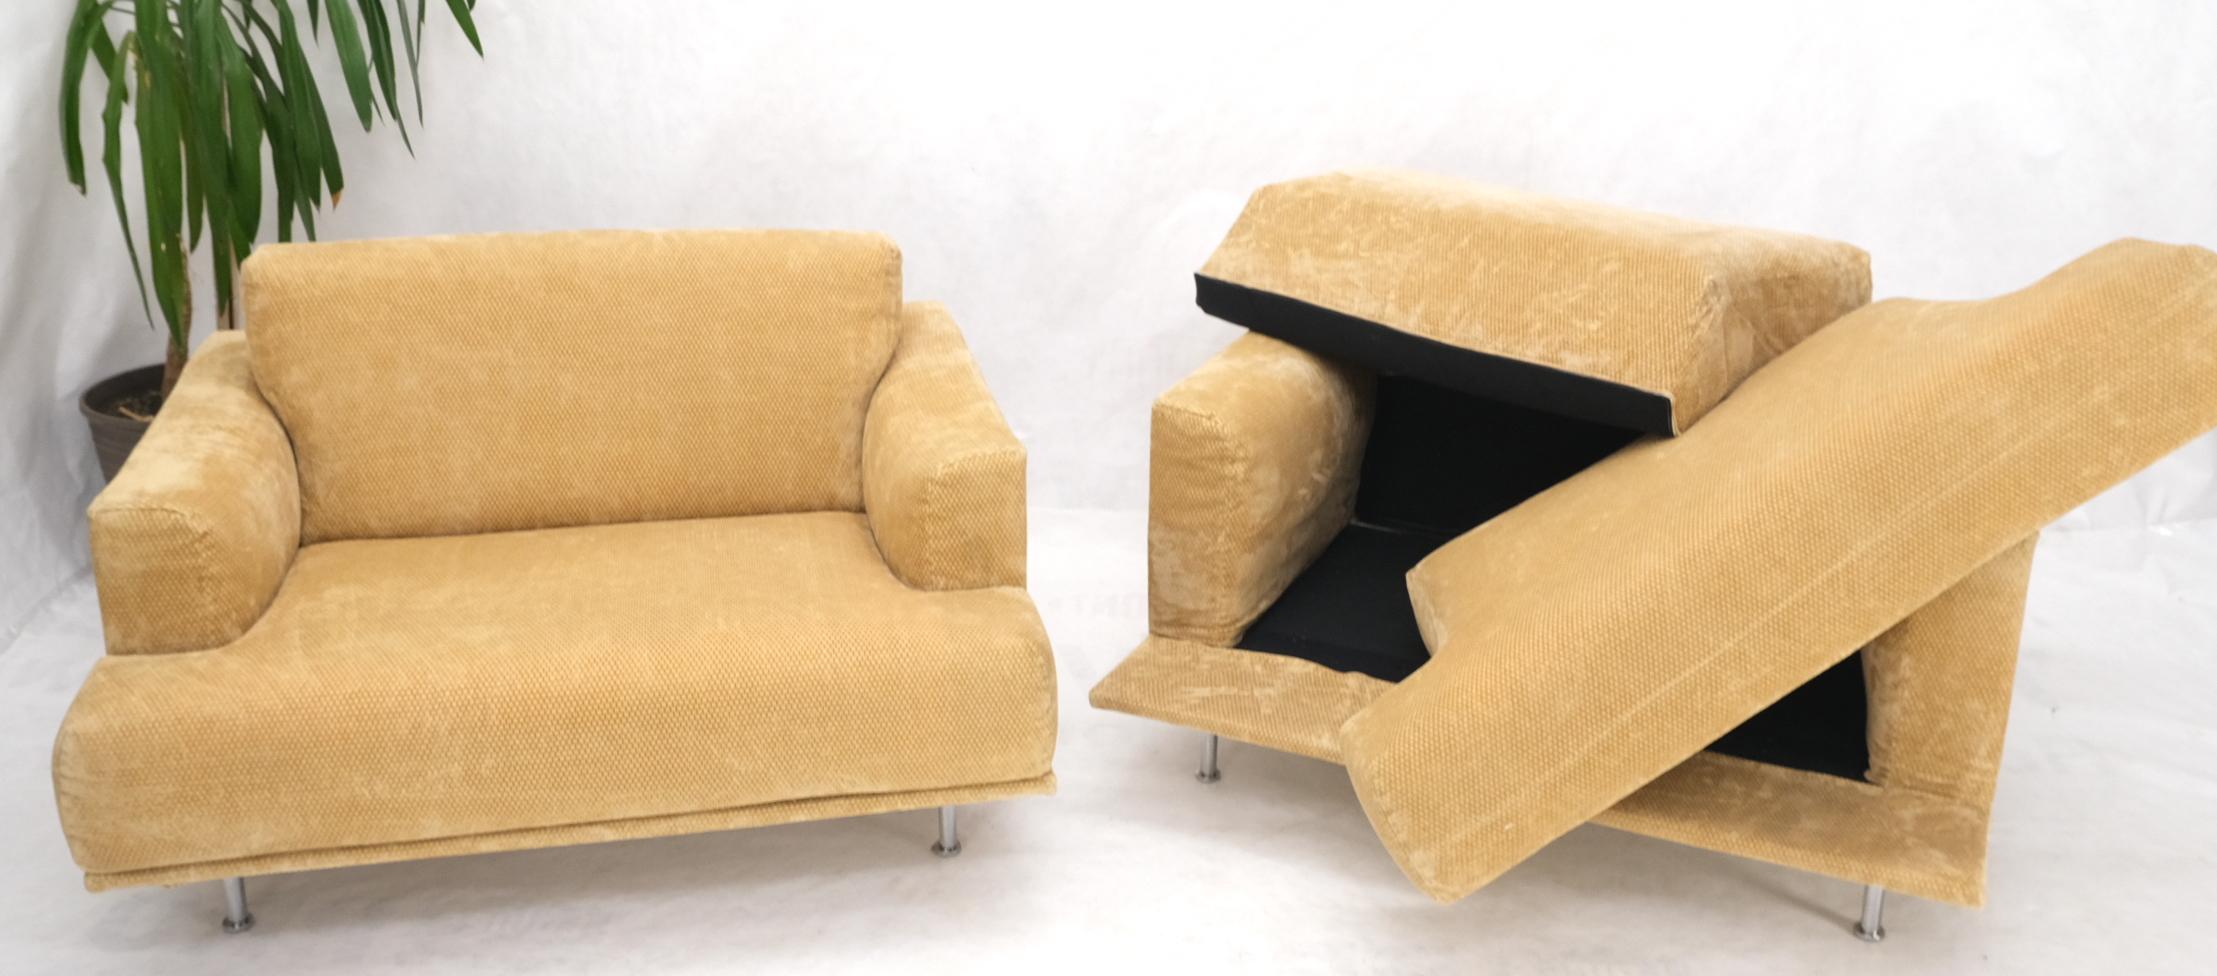 Pair of Wide Seat Almost Sattee Width Lounge Chairs by Cassina For Sale 3